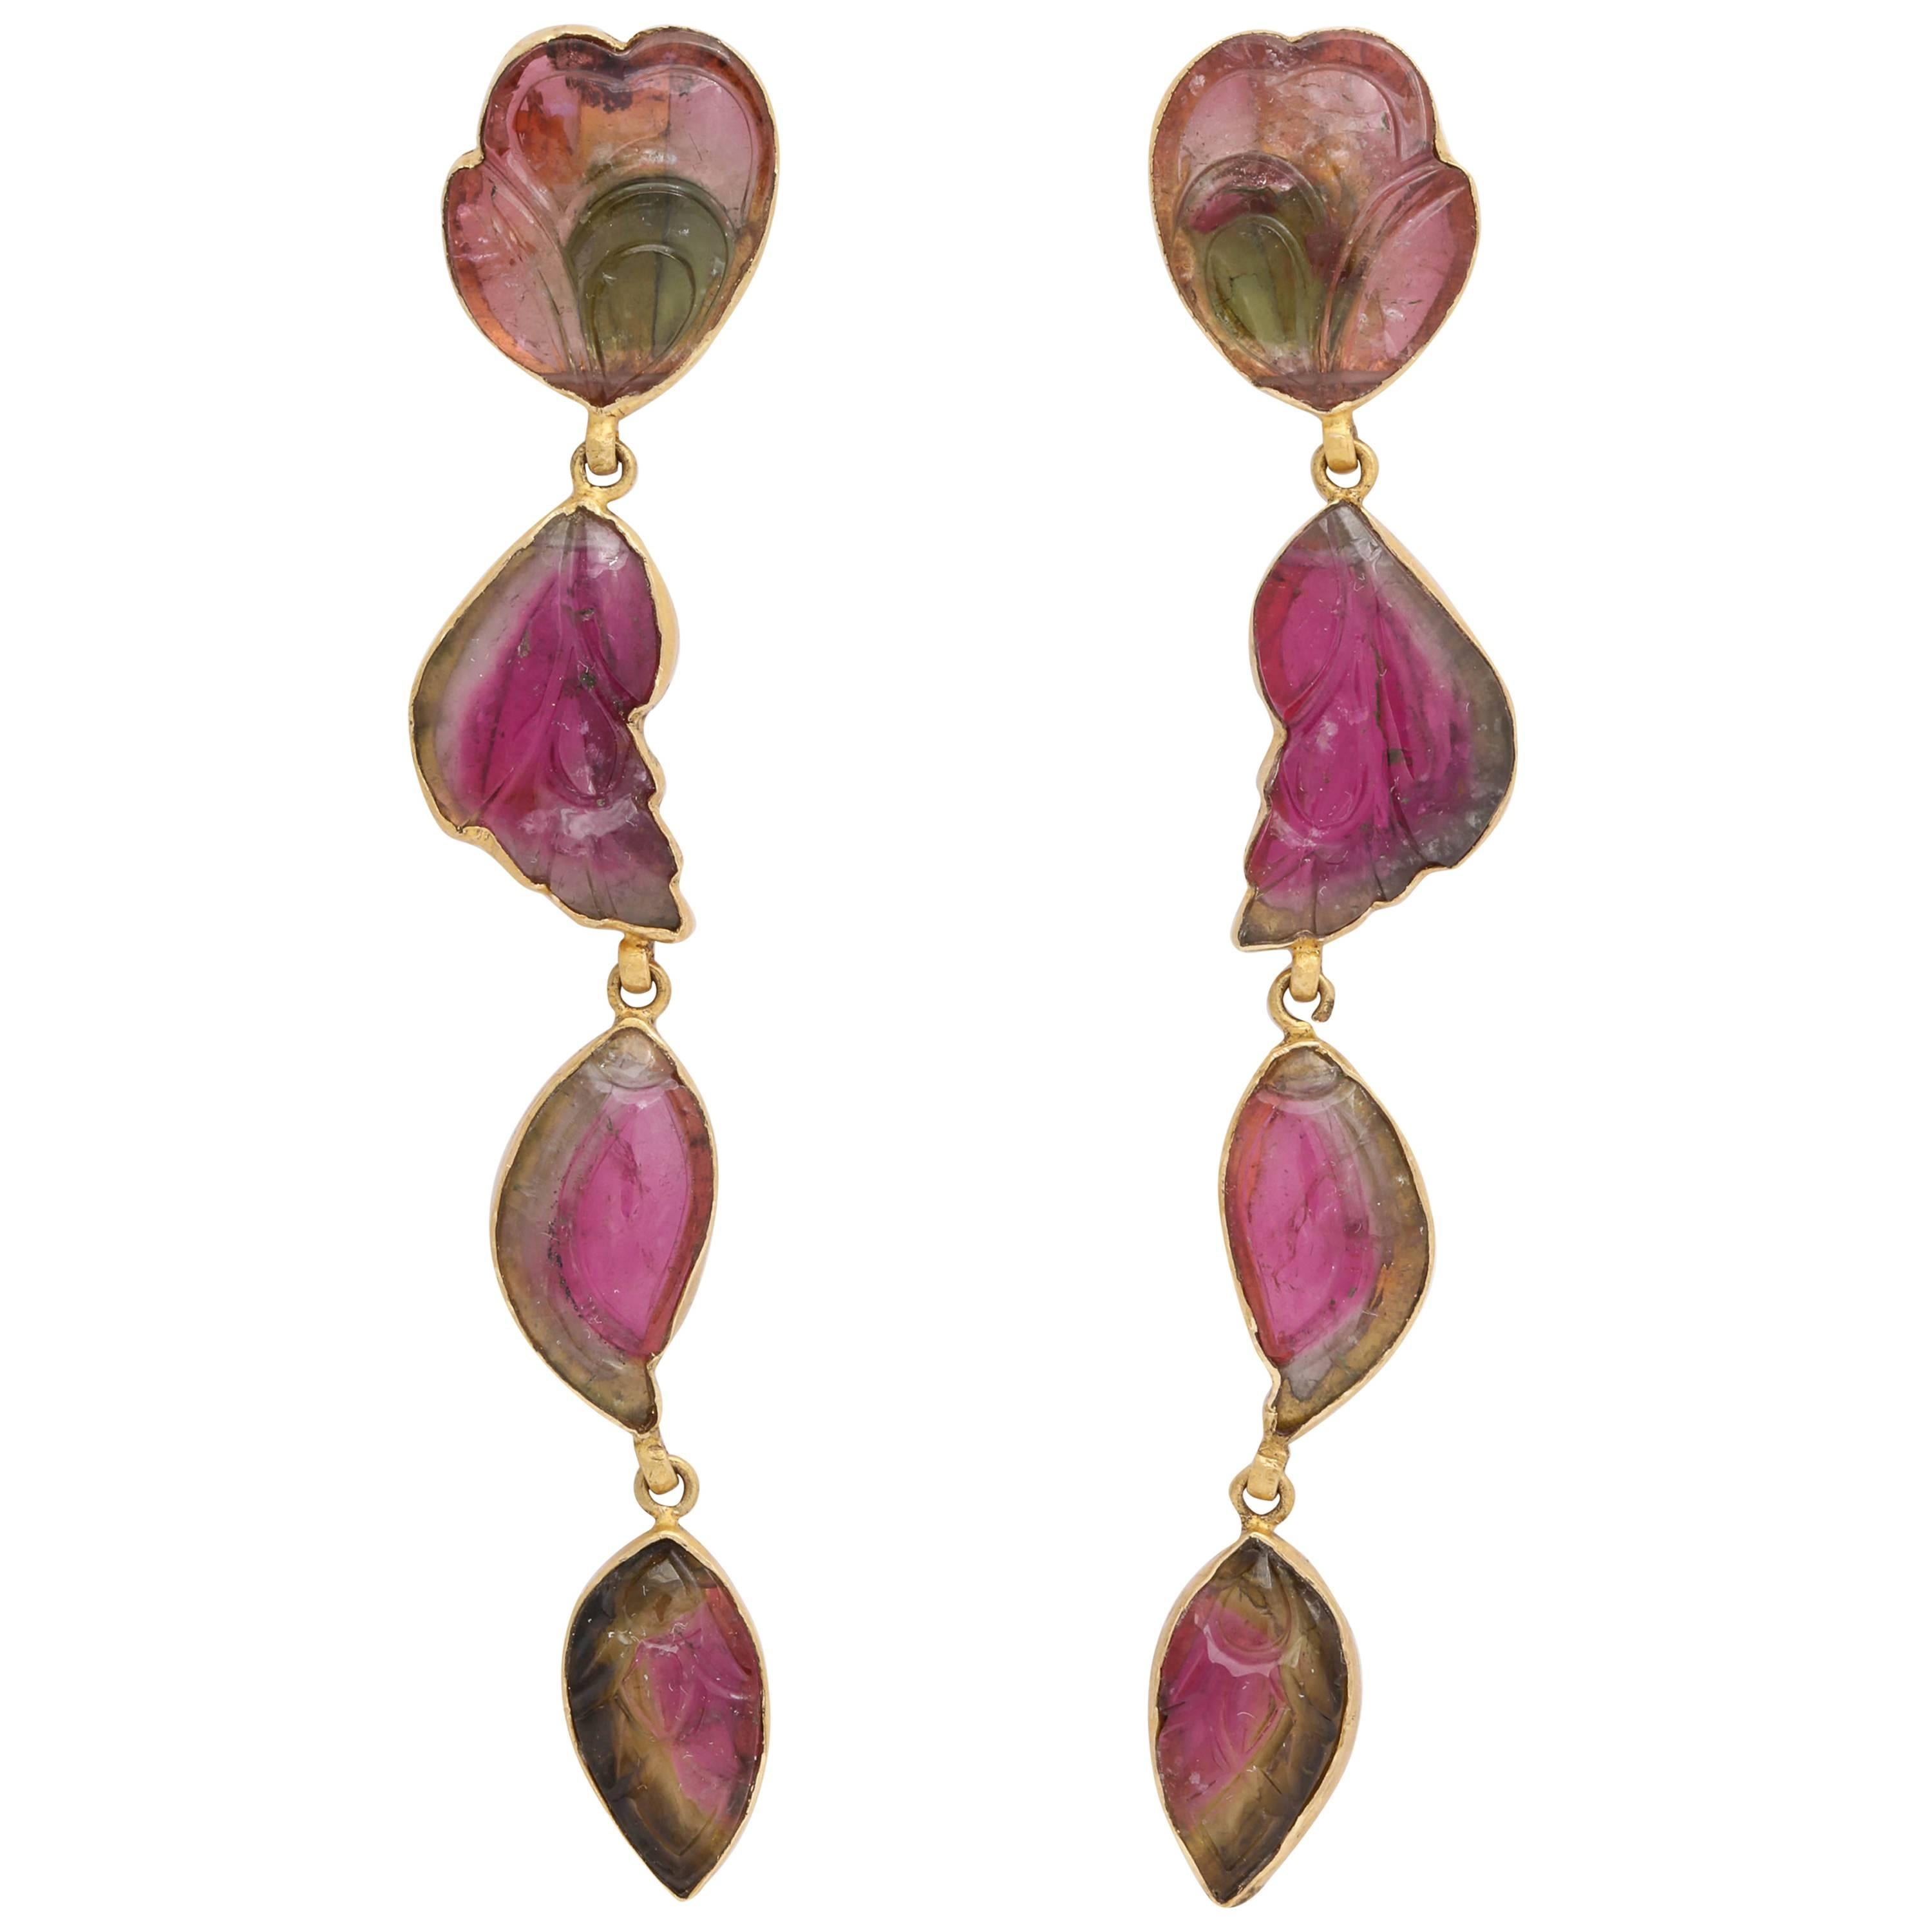 Rebecca Koven Gold Carved Watermelon Tourmaline Pendant Earrings For Sale